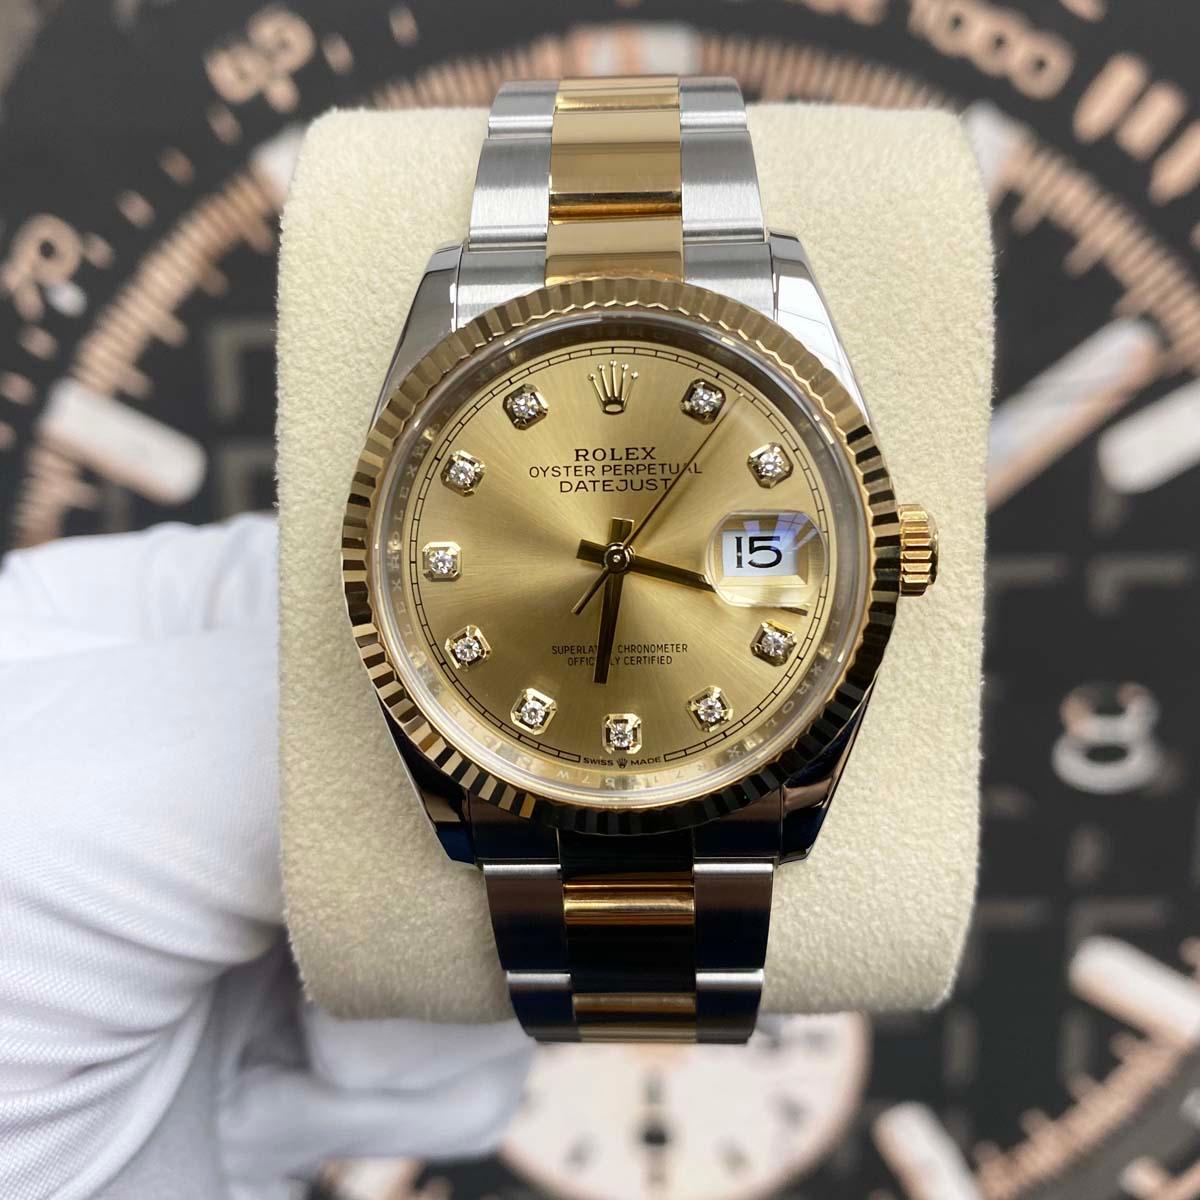 Rolex Datejust Champagne Diamond Dial Fluted Bezel 36mm 126233 Mint Condition Pre-Owned - Gotham Trading 